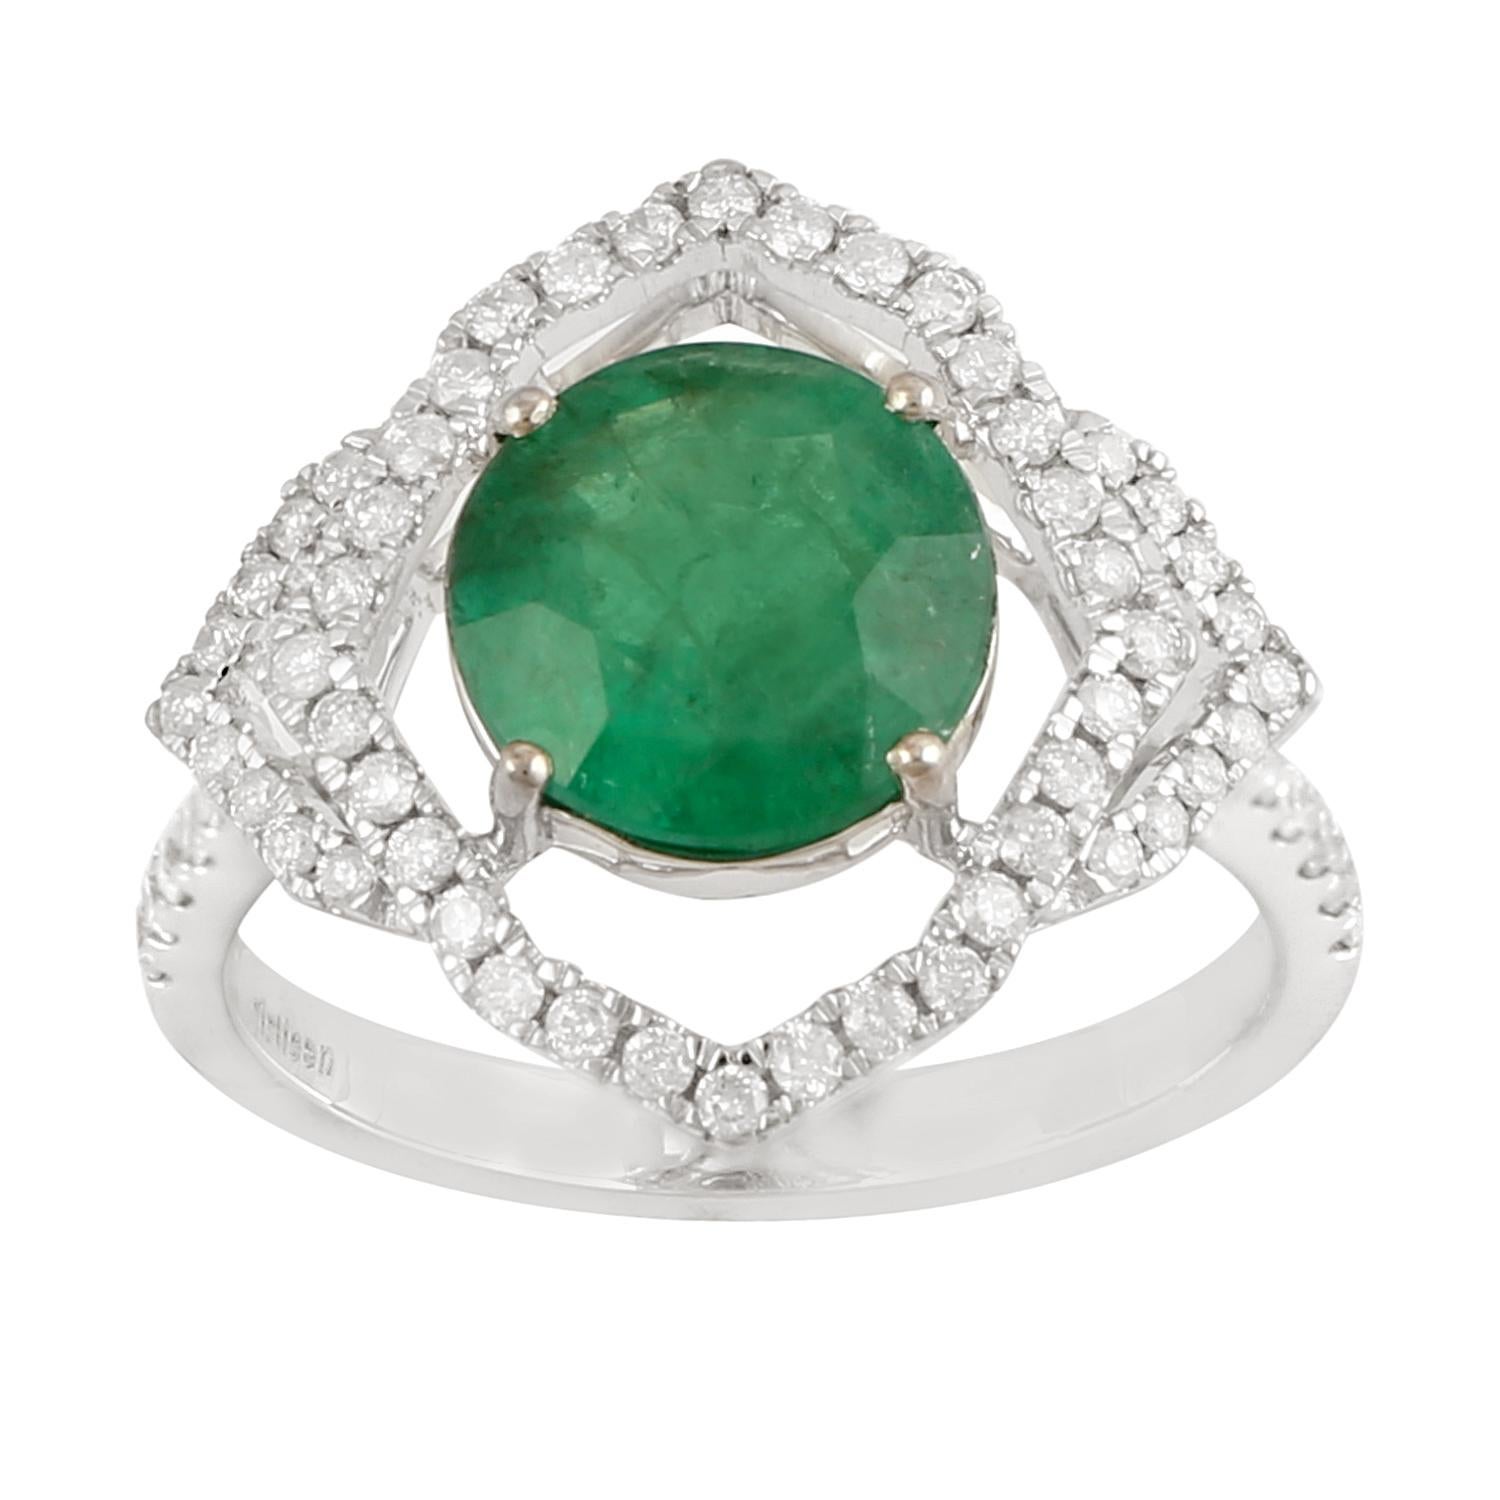 Natural Emerald Cocktail Ring With Halo Diamonds Made In 18K White Gold In New Condition For Sale In New York, NY